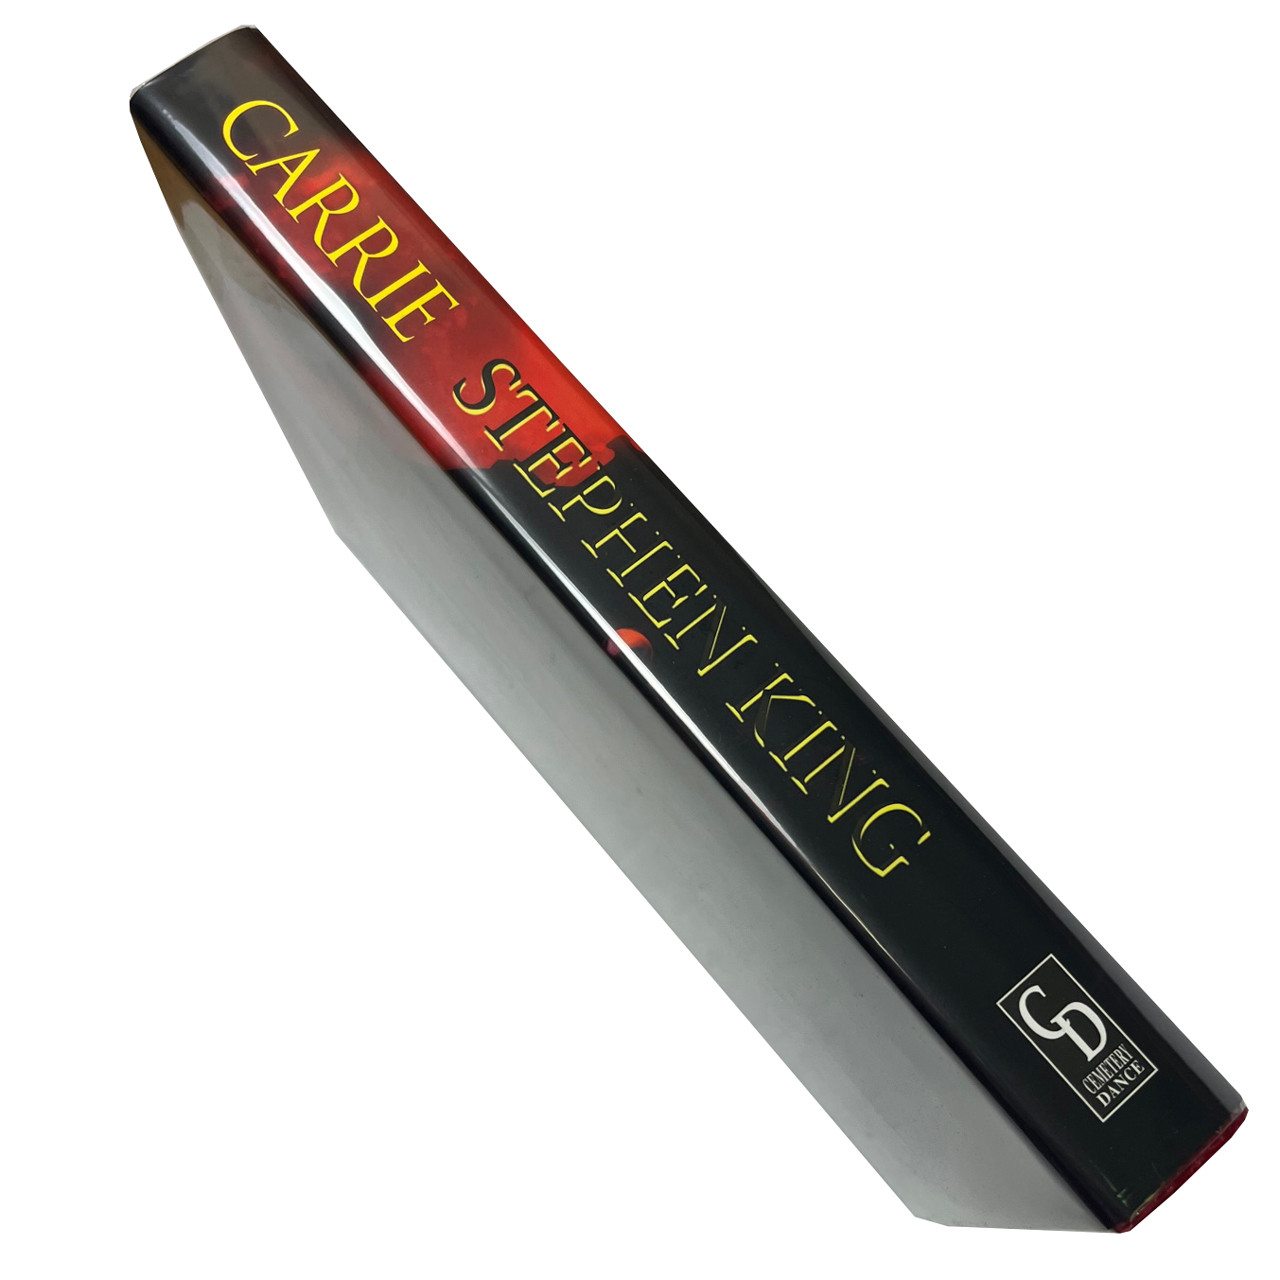 Stephen King "Carrie" The Doubleday Years,  Signed Limited Artist Edition No. 283 of 750 [Very Fine]